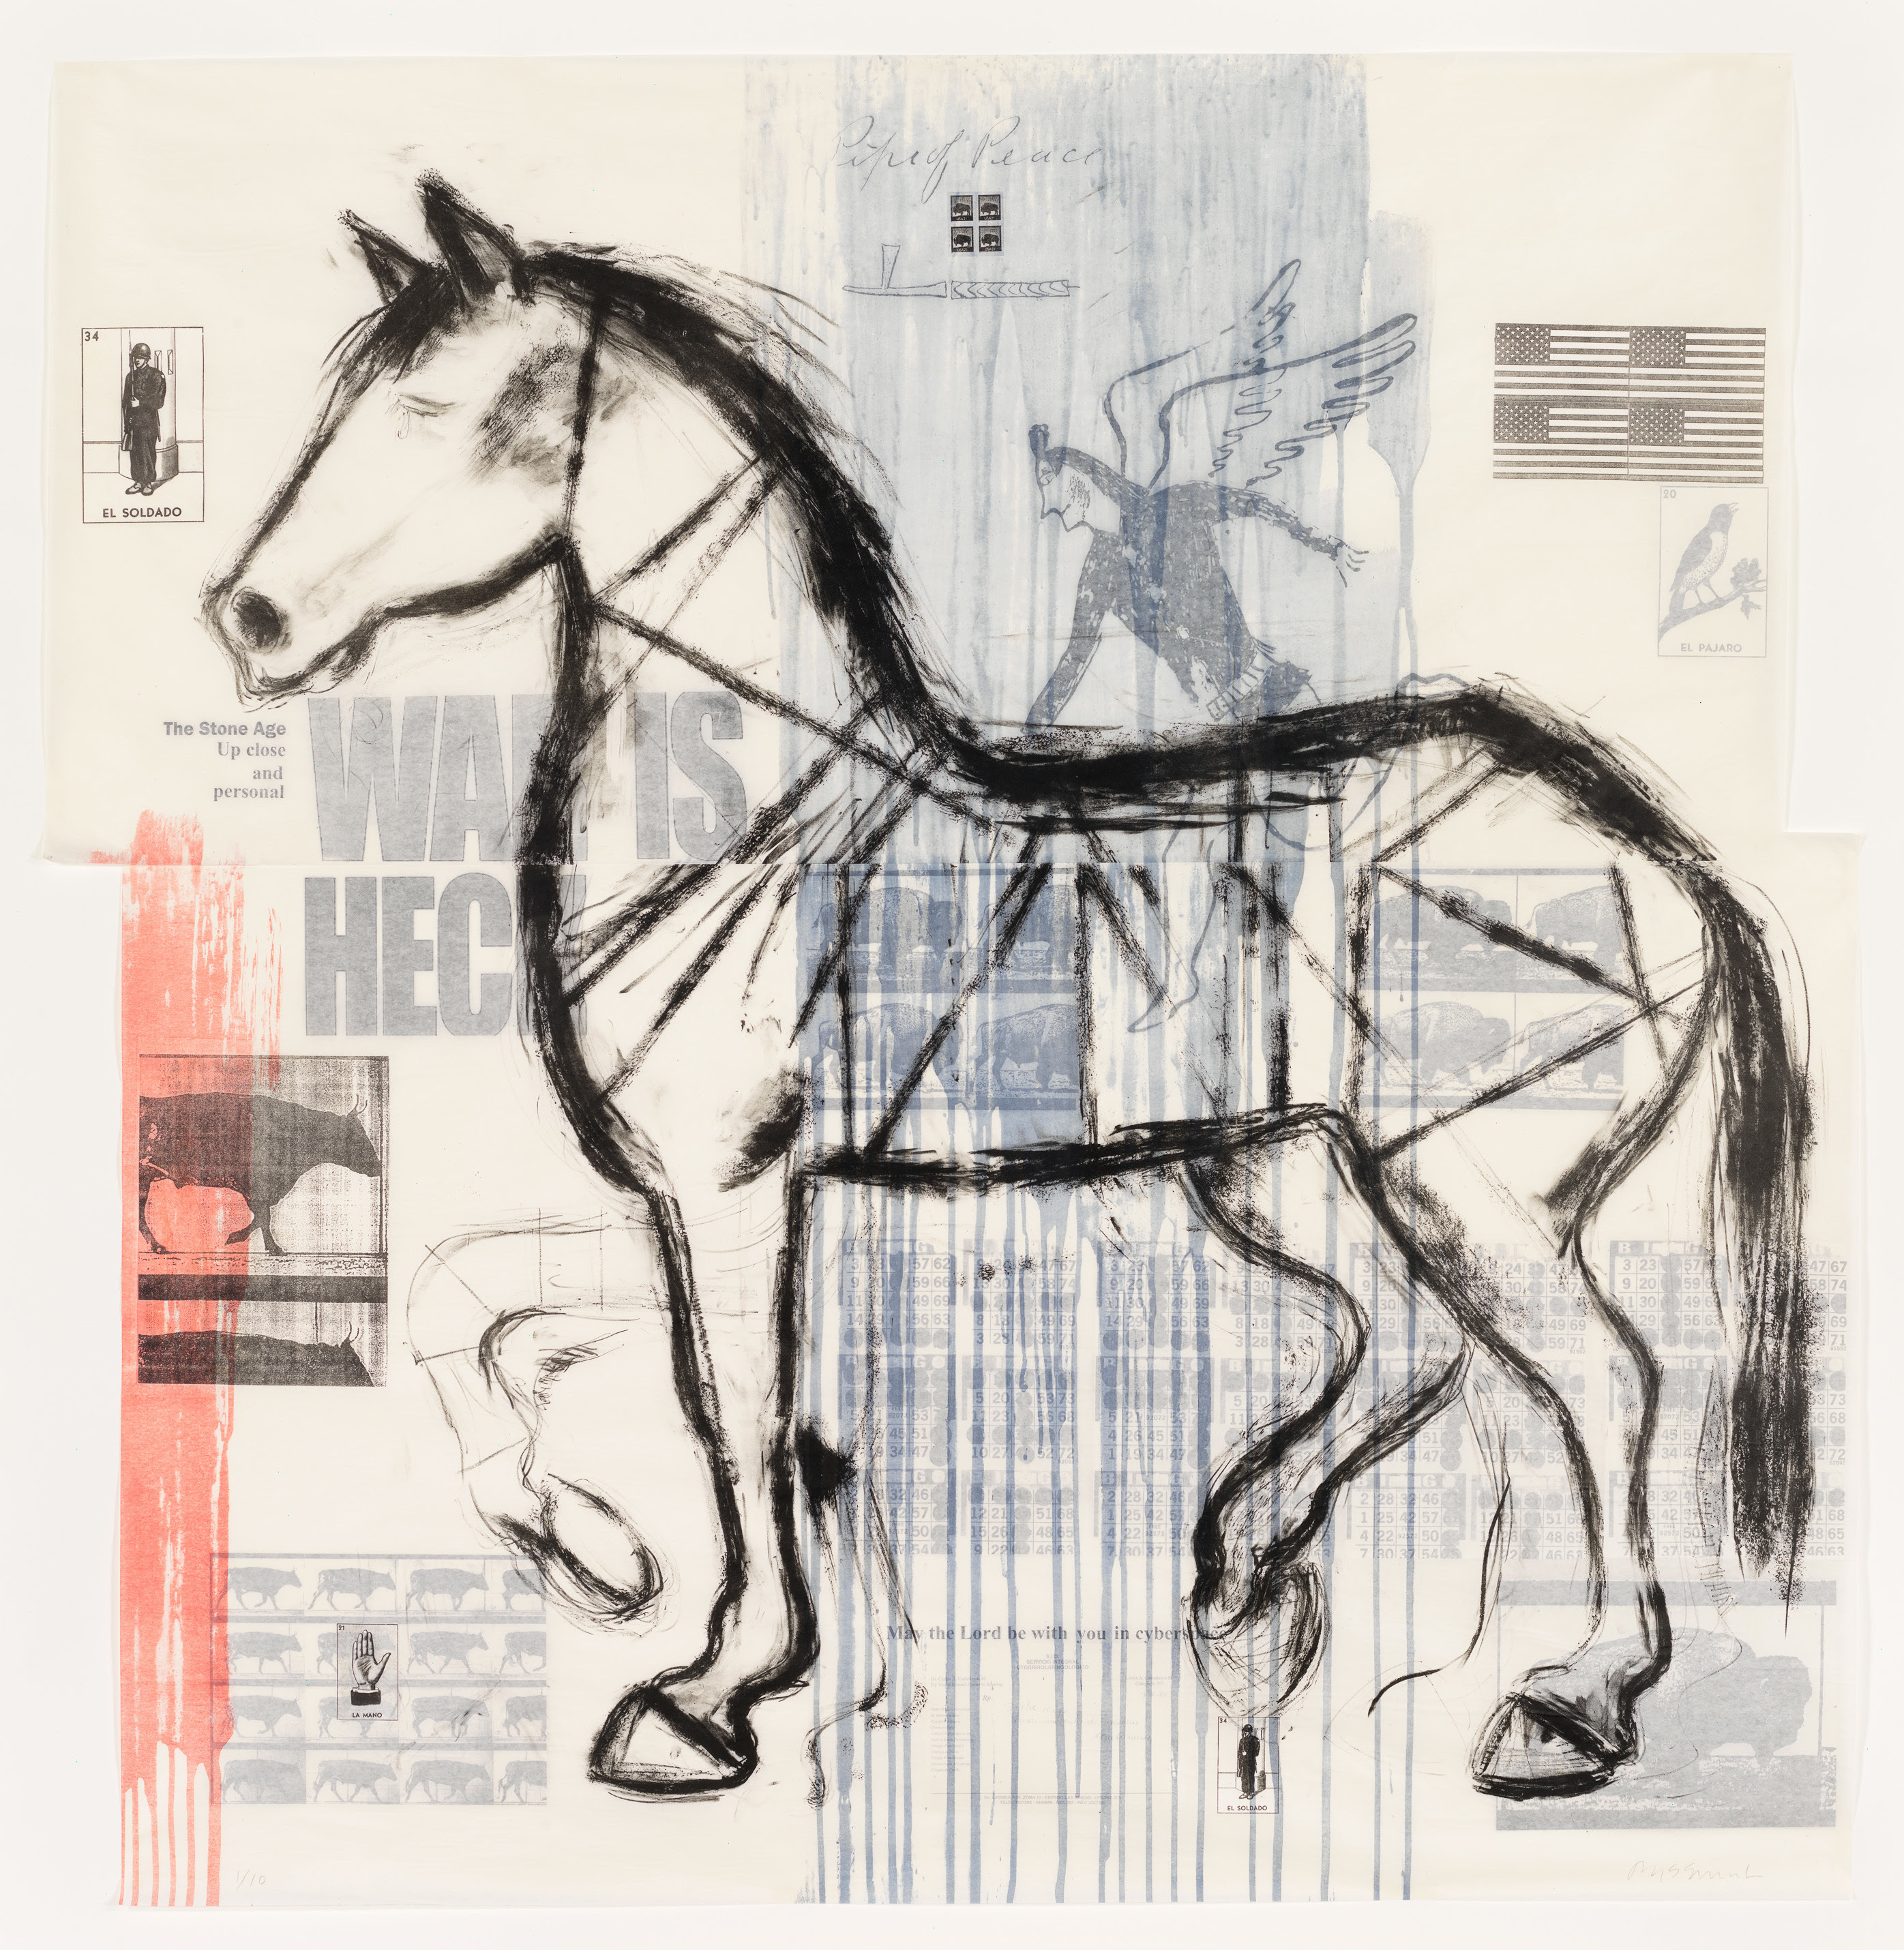 Jaune Quick-to-See Smith, War is Heck, 2002. Lithograph, photolithograph, and collage, sheet: 58 9/16 × 57 5/8 in. (148.7 × 146.4 cm). 1/10 | 4 TPs, BAT; Printed and published by P.R.I.N.T. Press. Whitney Museum of American Art, New York; gift of Dorothee Peiper-Riegraf and Hinrich Peiper 2006.287. Courtesy the artist and the Garth Greenan Gallery, New York